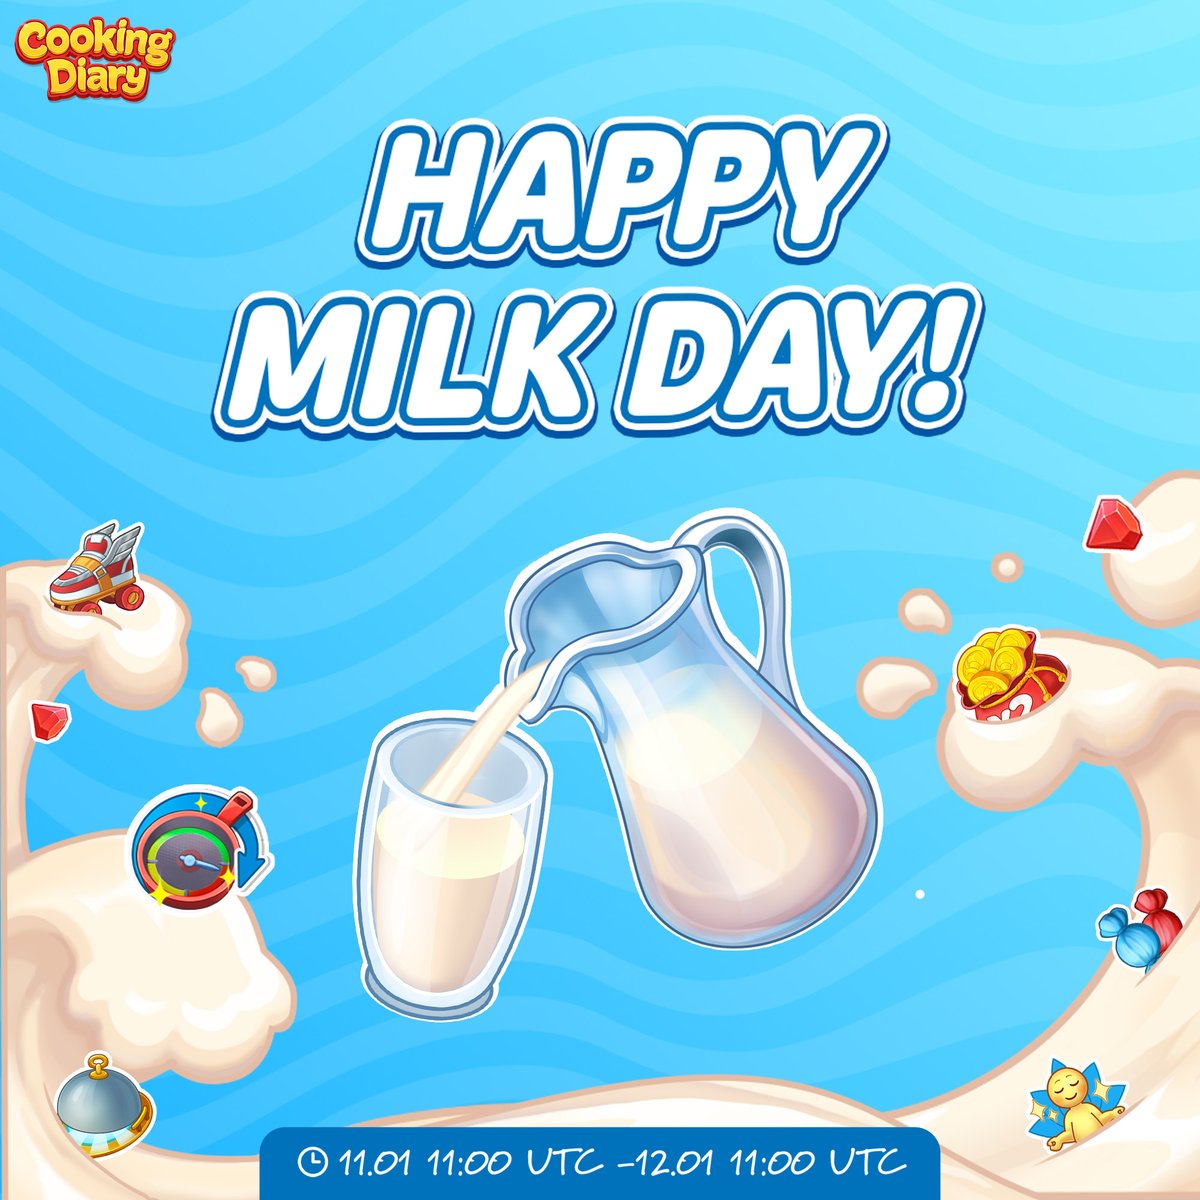 🥛 Chef, treat yourself to a wonderful Milk Day offer! You can't afford to miss savings like these! 😍
🚀 Quick! Before the offer ends: https://t.co/dxreAN1b3g ✅
How many boosters and rubies are currently in your Cooking Diary treasury? Share below! 🚀🍪 